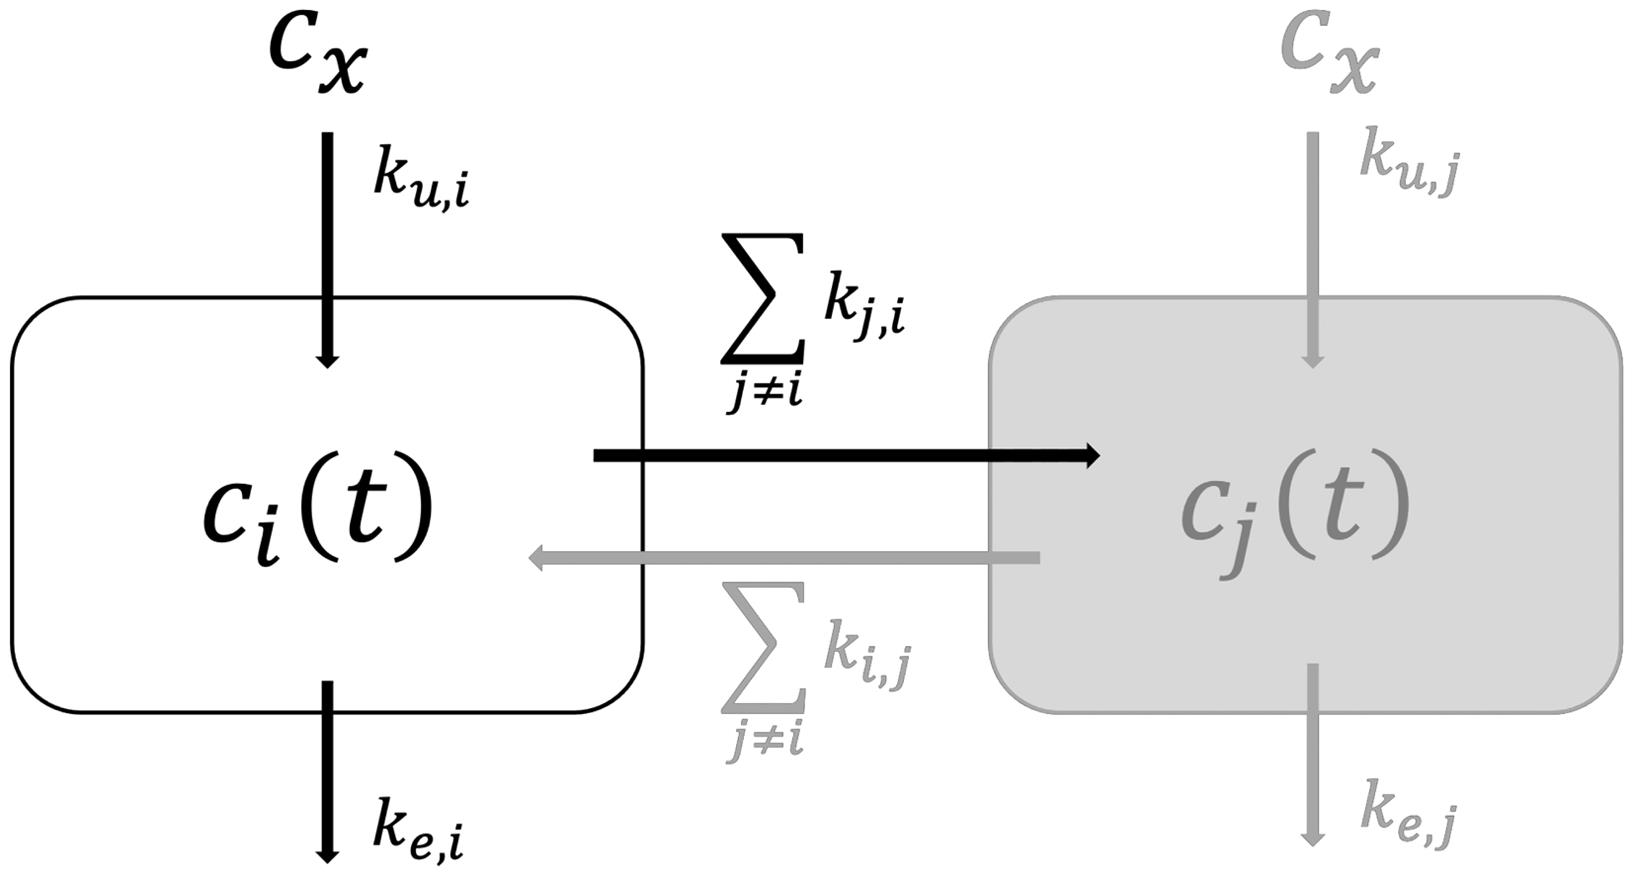 Generic scheme of a multi-compartments physiologically-based kinetic model connecting <italic>n</italic> compartments two-by-two and each of them to the external medium at exposure concentration <italic>c<sub>x</sub></italic> (<italic>i, j</italic> ∊ [1;<italic>n</italic>]).